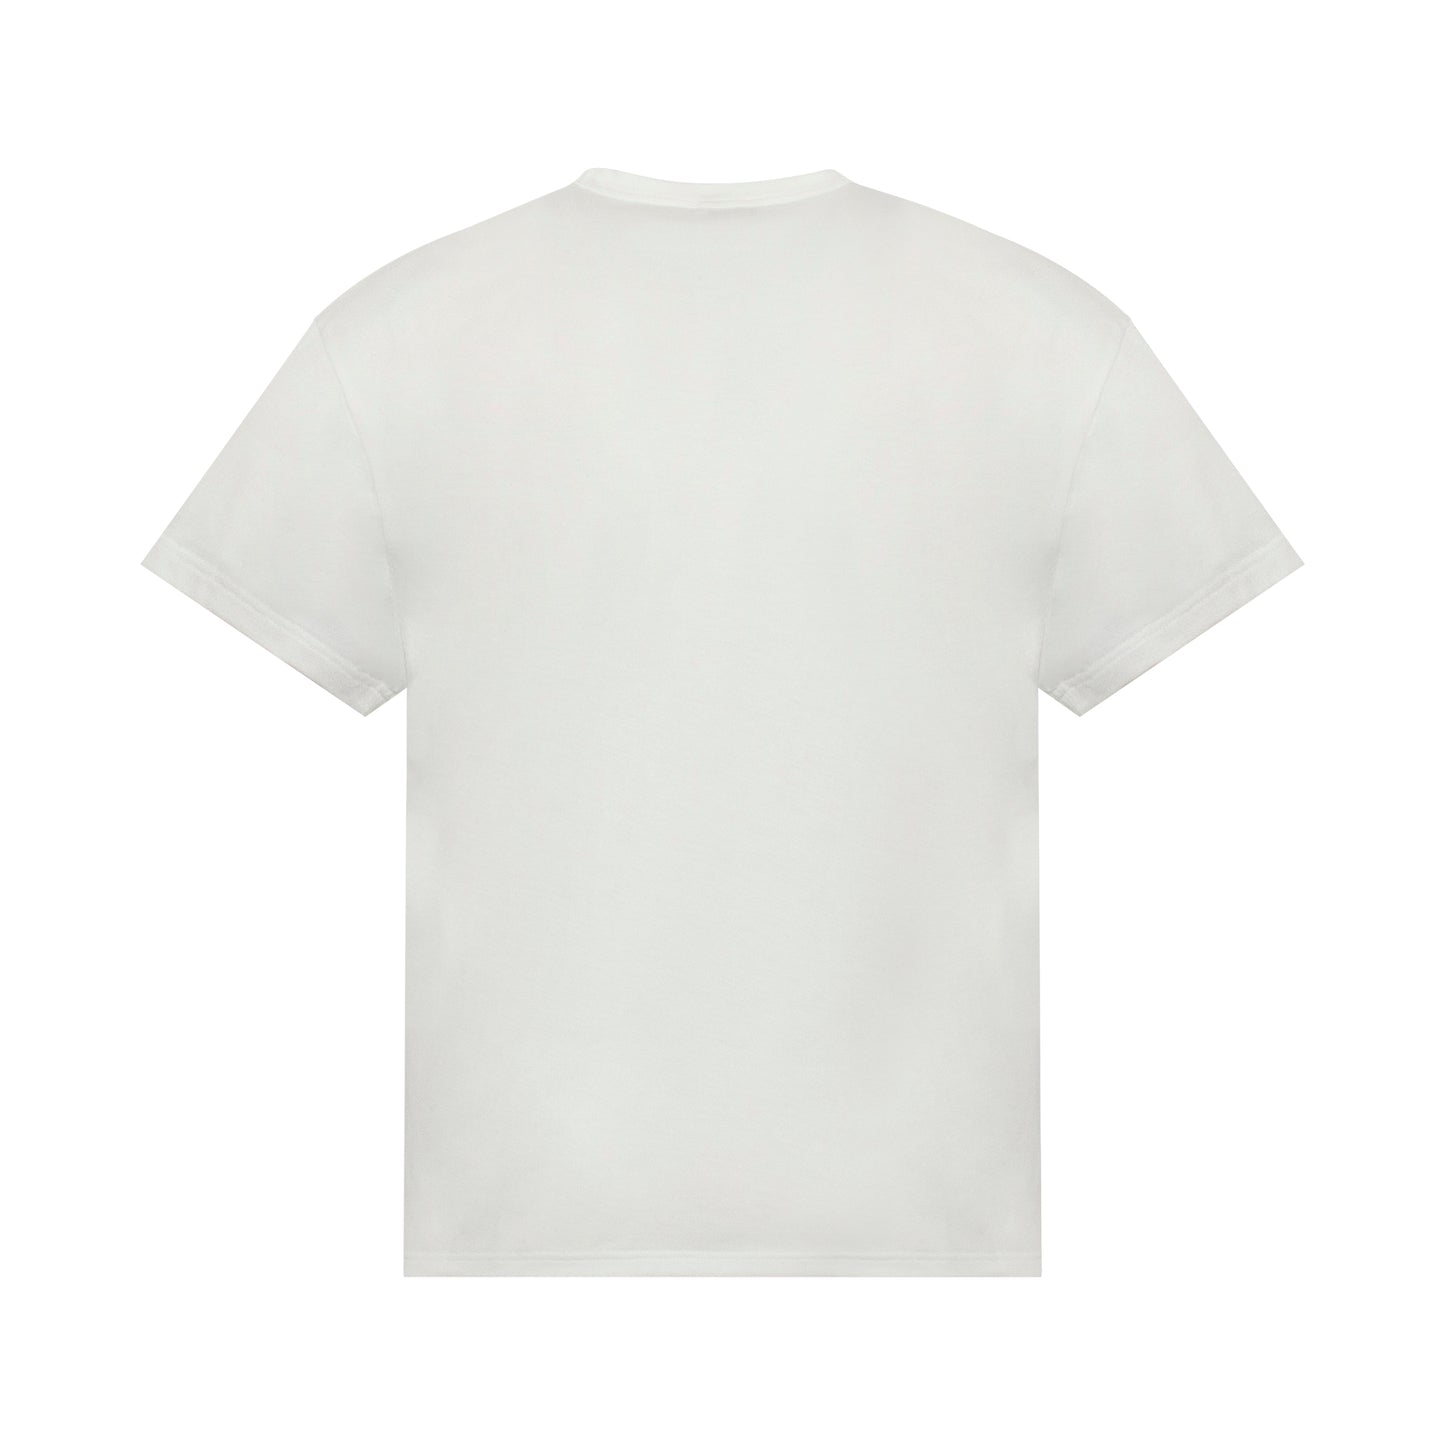 Skull Patch T-Shirt in White